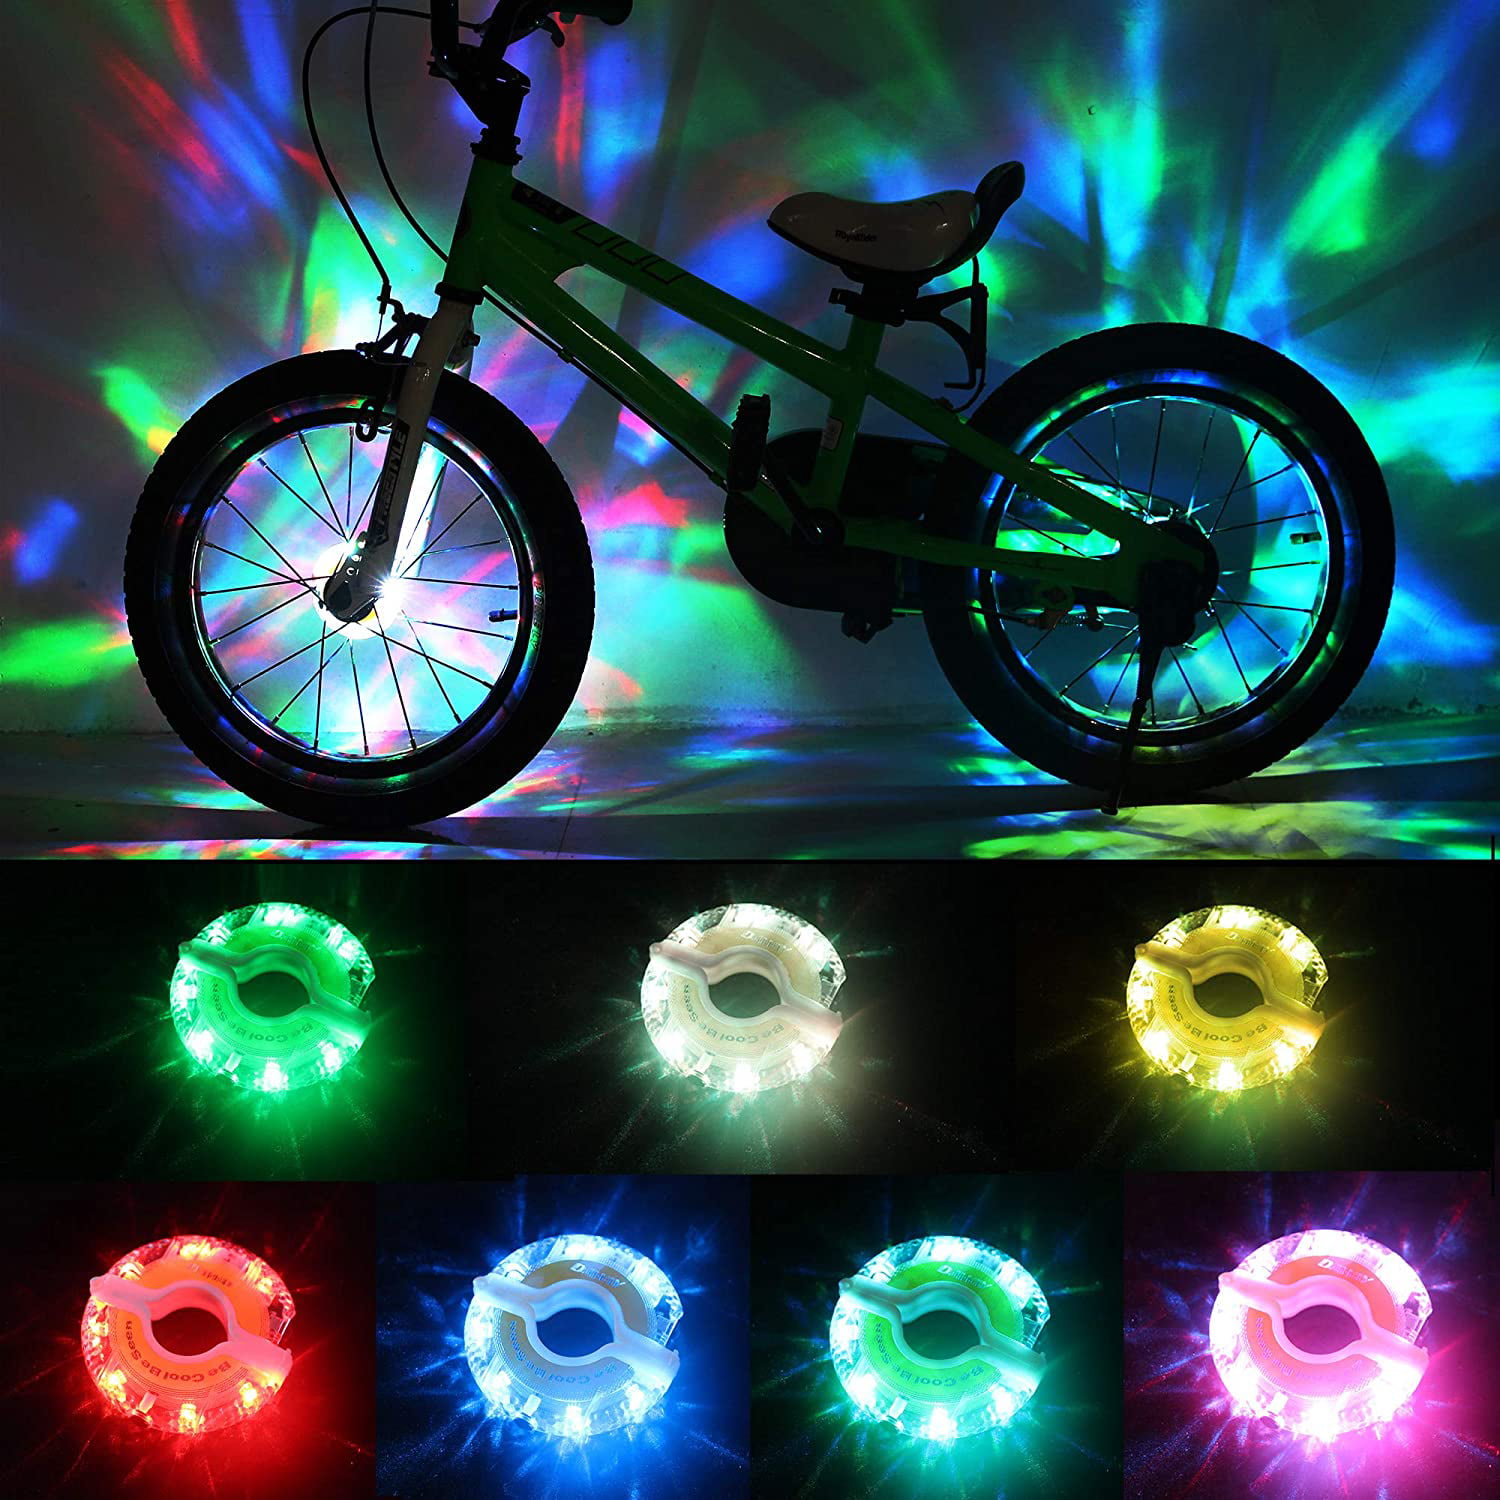 Easy to Install Perfect for Safety and Fun Personalized LED Colorful Wheel Lights Soondar Super Bright 20-LED Bicycle Bike Rim Lights Blue Green Red Pink White Multicolore 